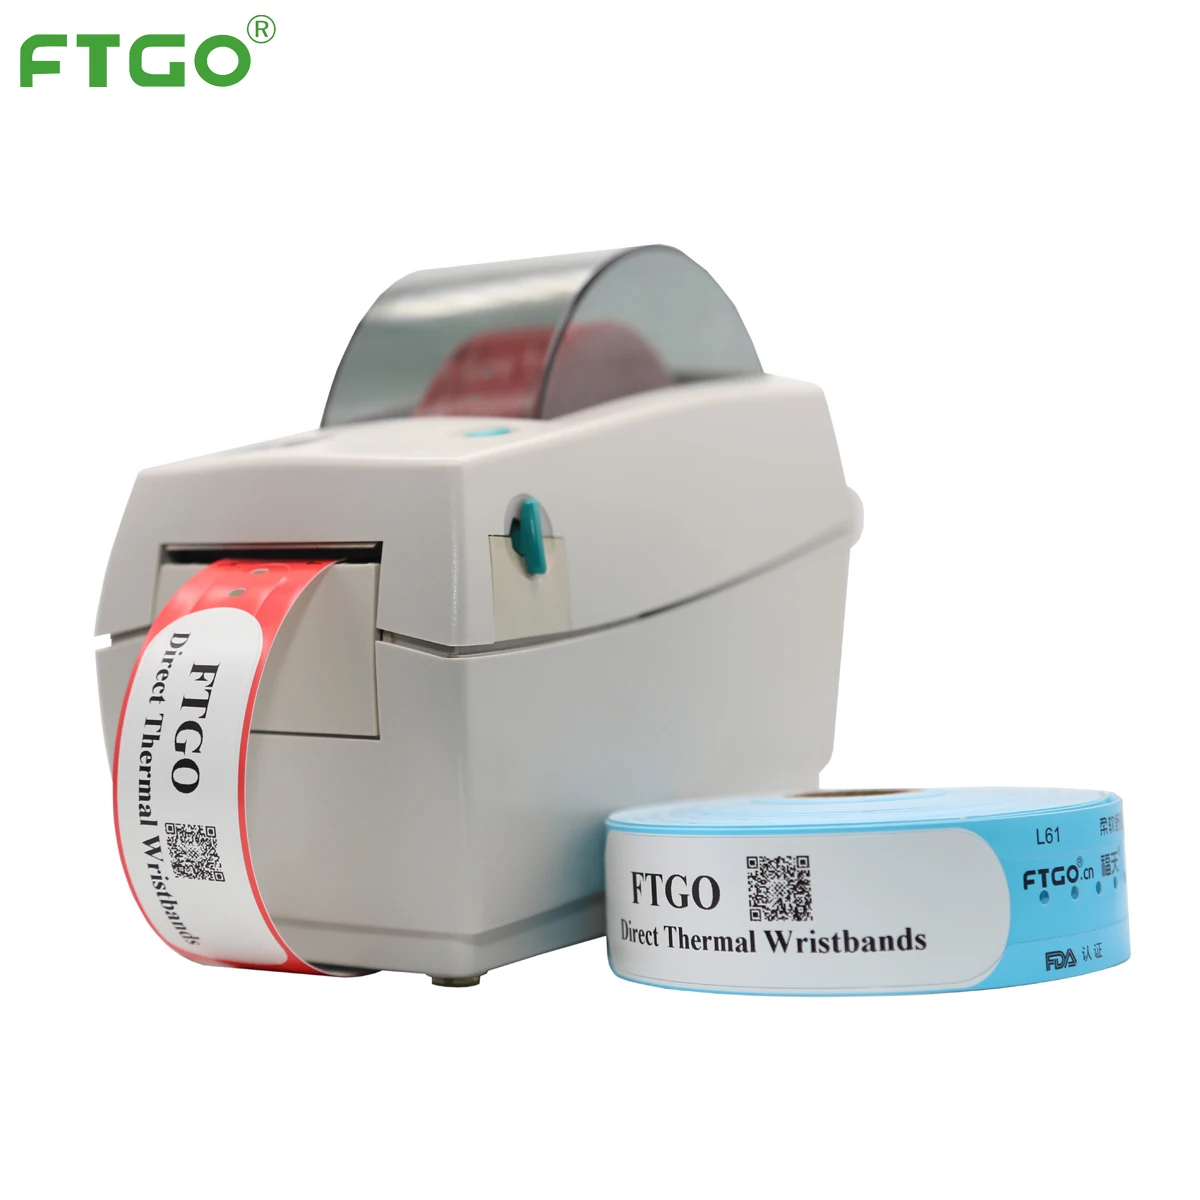 

FTGO Zebra LP2824 barcode printer for direct thermal wristbands or labels